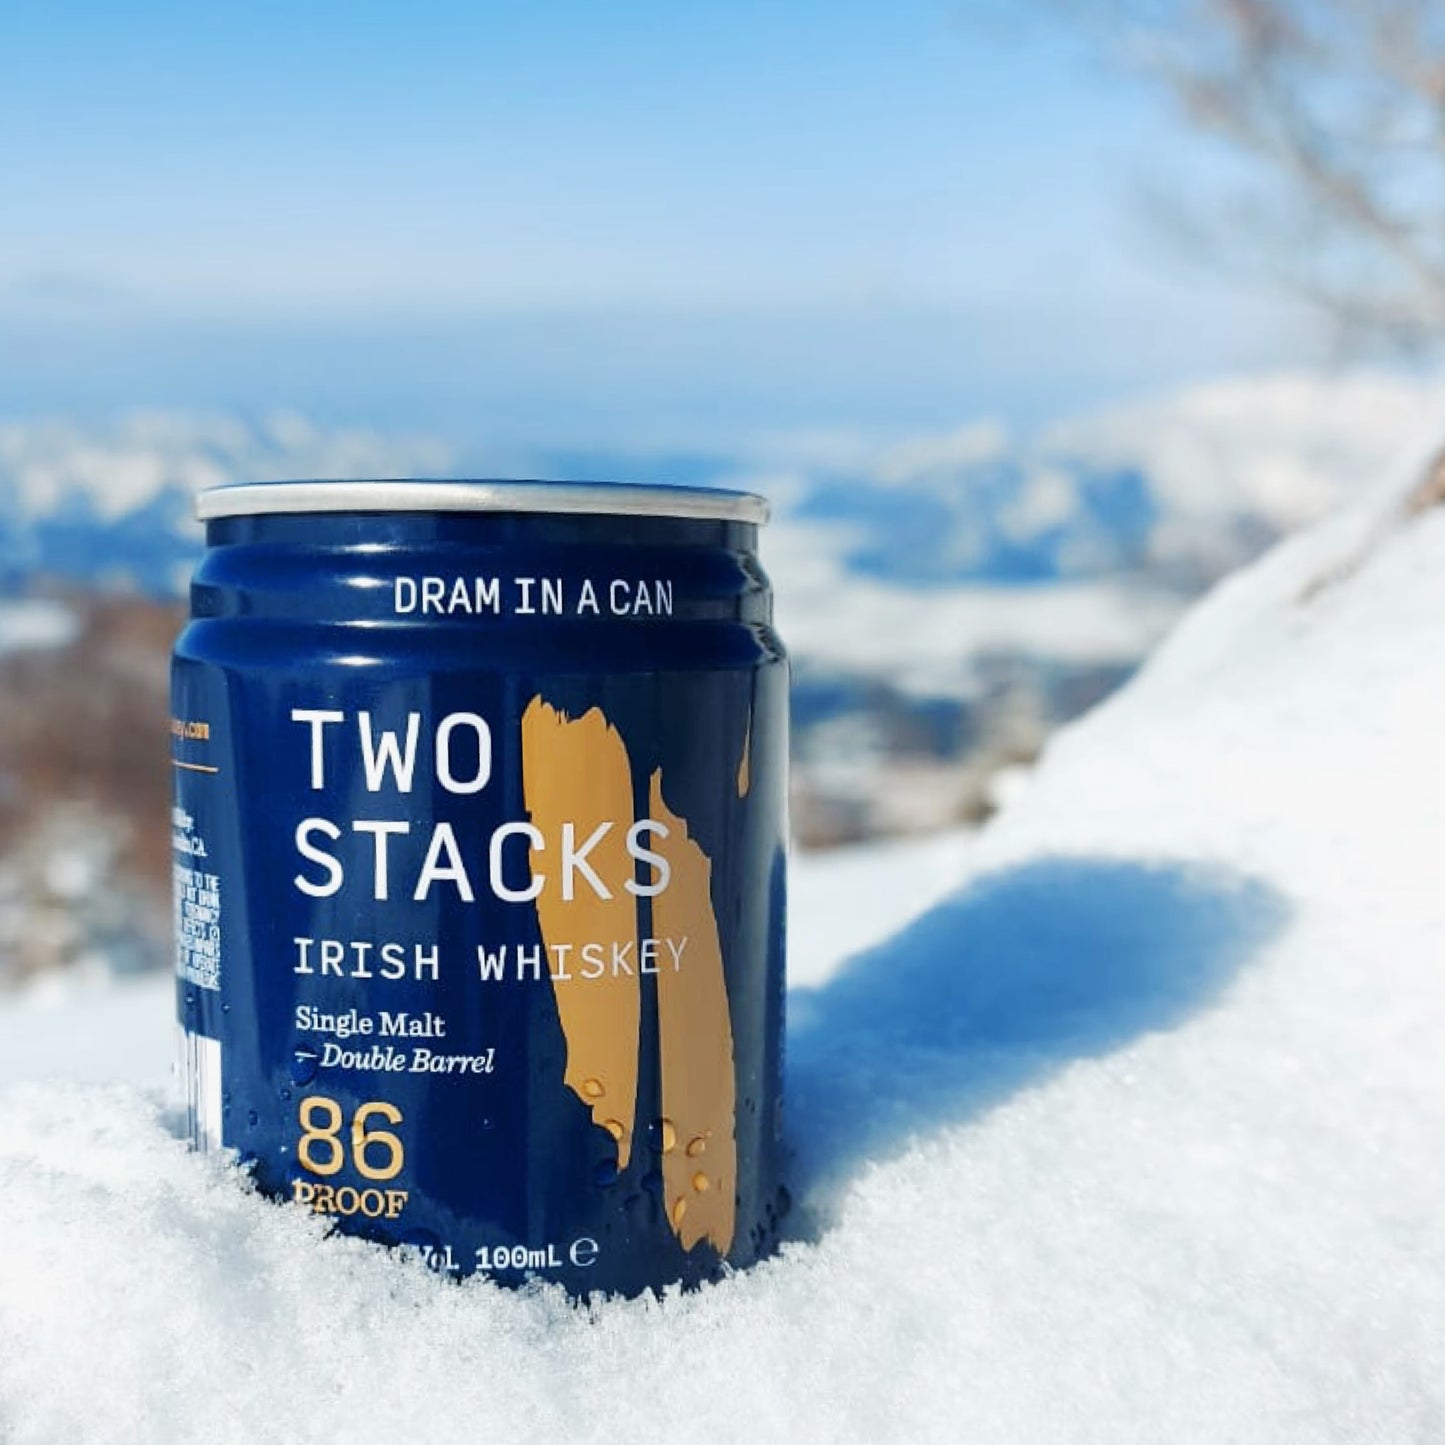 TWO STACKS single malt whiskey 100ml x 4 cans